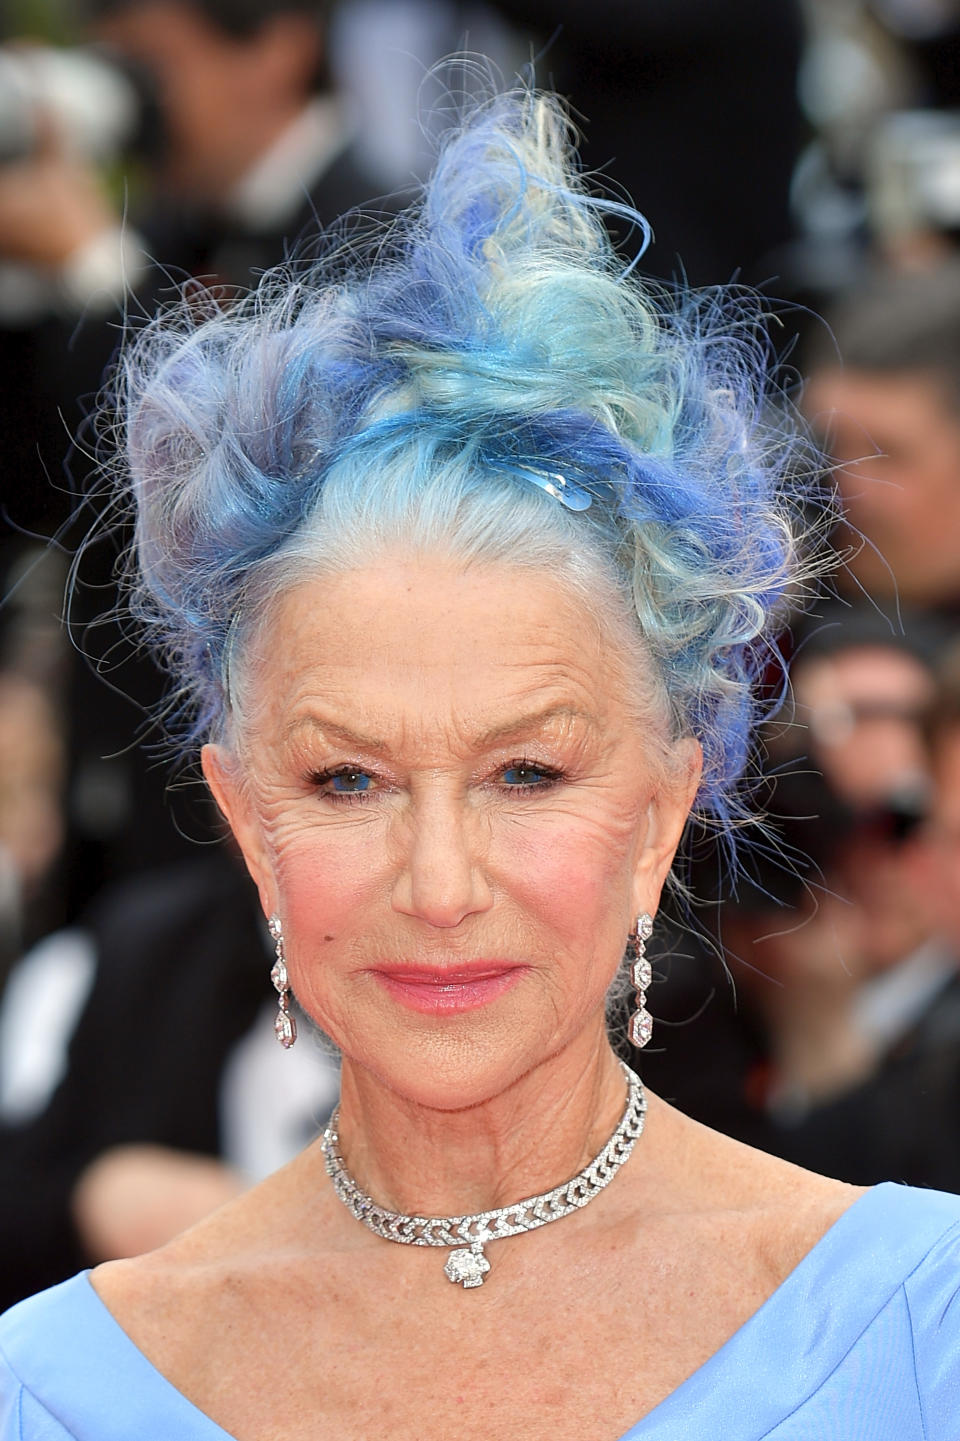 Helen Mirren appeared at Cannes with bright blue hair. (Getty Images)